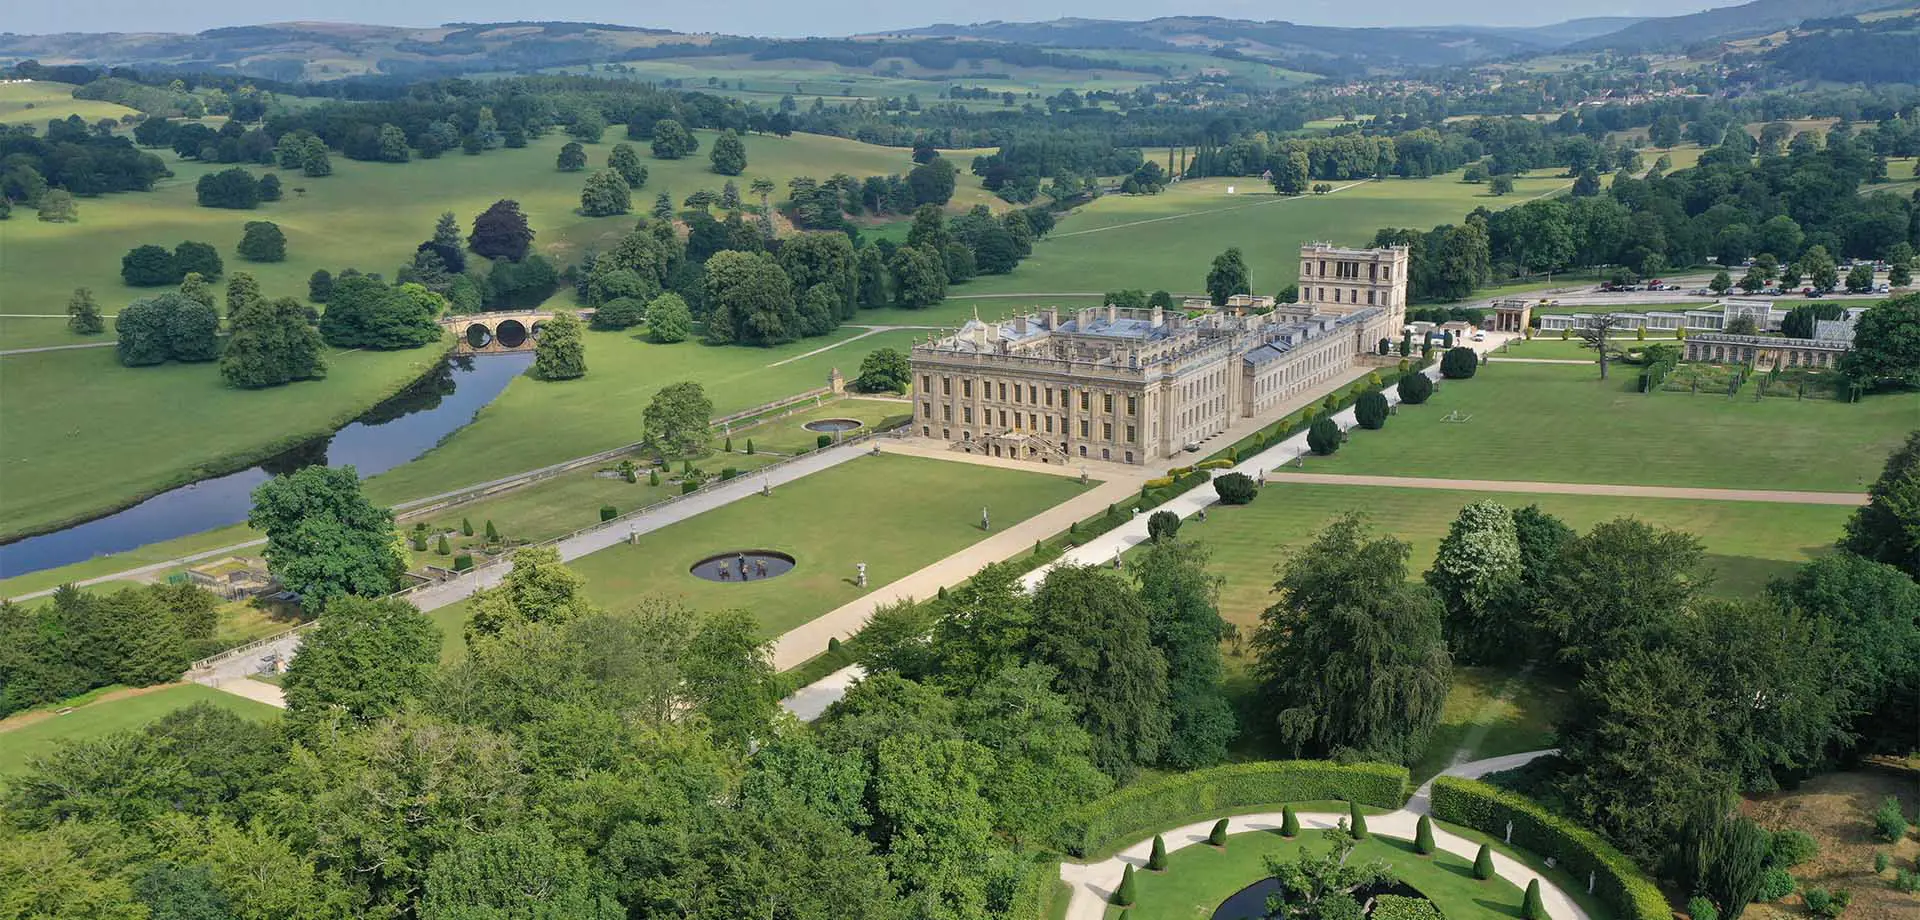 Your visit to Chatsworth